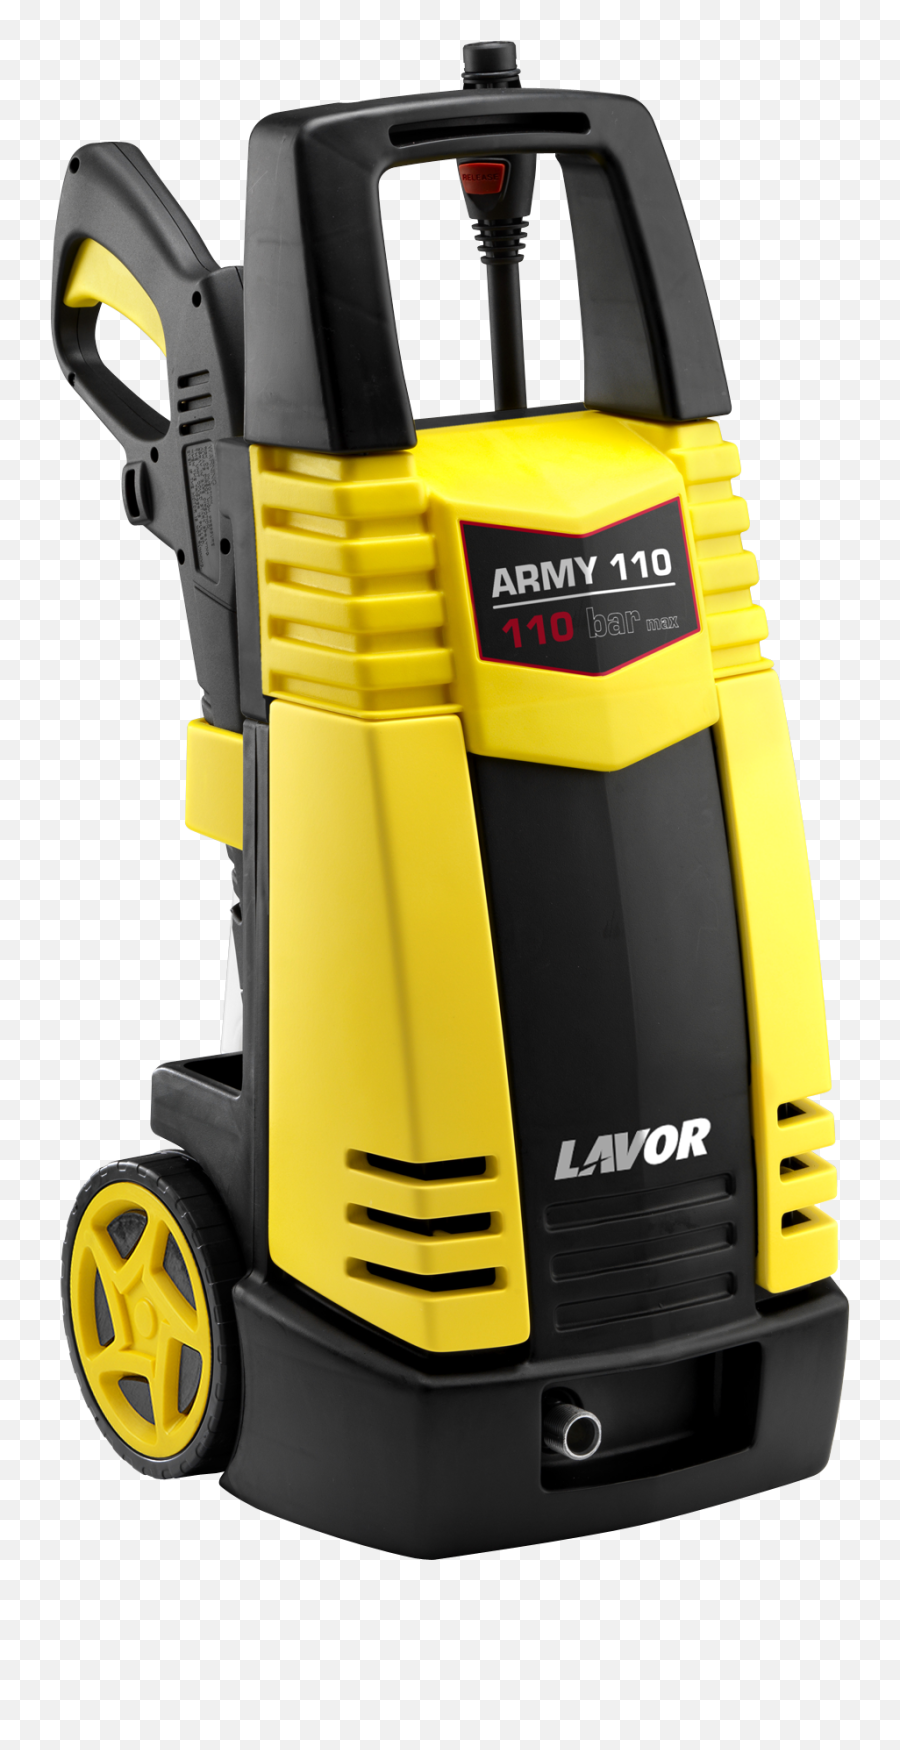 Lavor Army 110 - Idropulitrice Lavor Navy 140 Png,Army Png